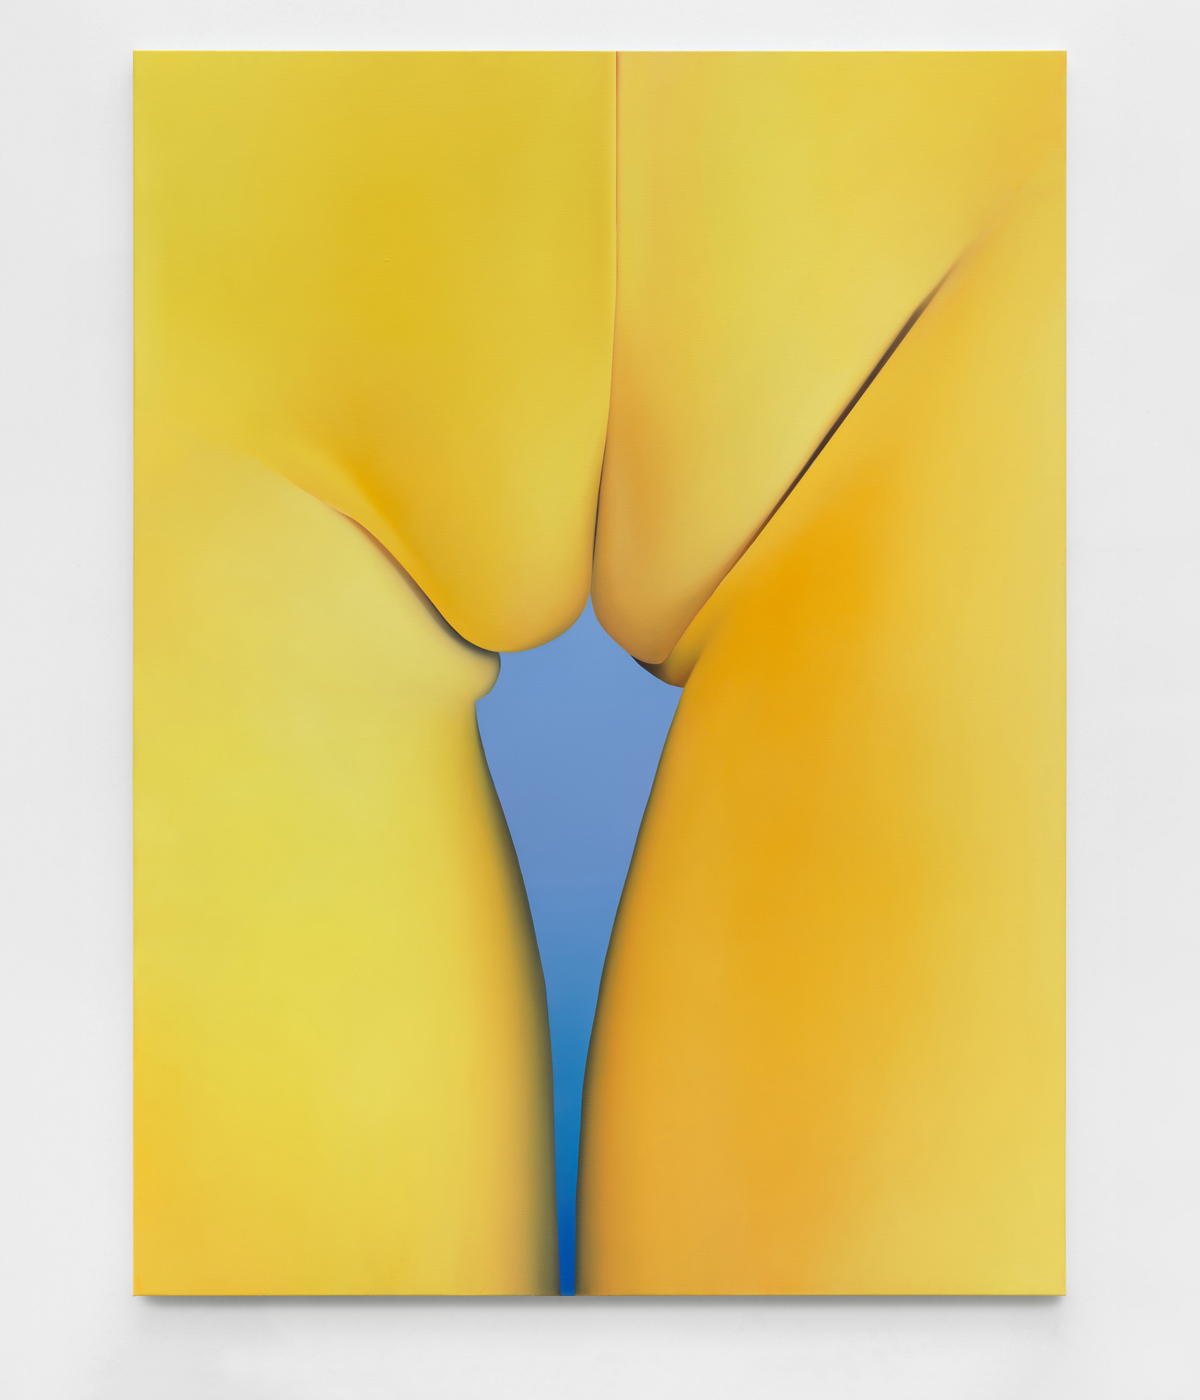 Yello and blue abstract artwork resembling woman's groin by Vivian Greven